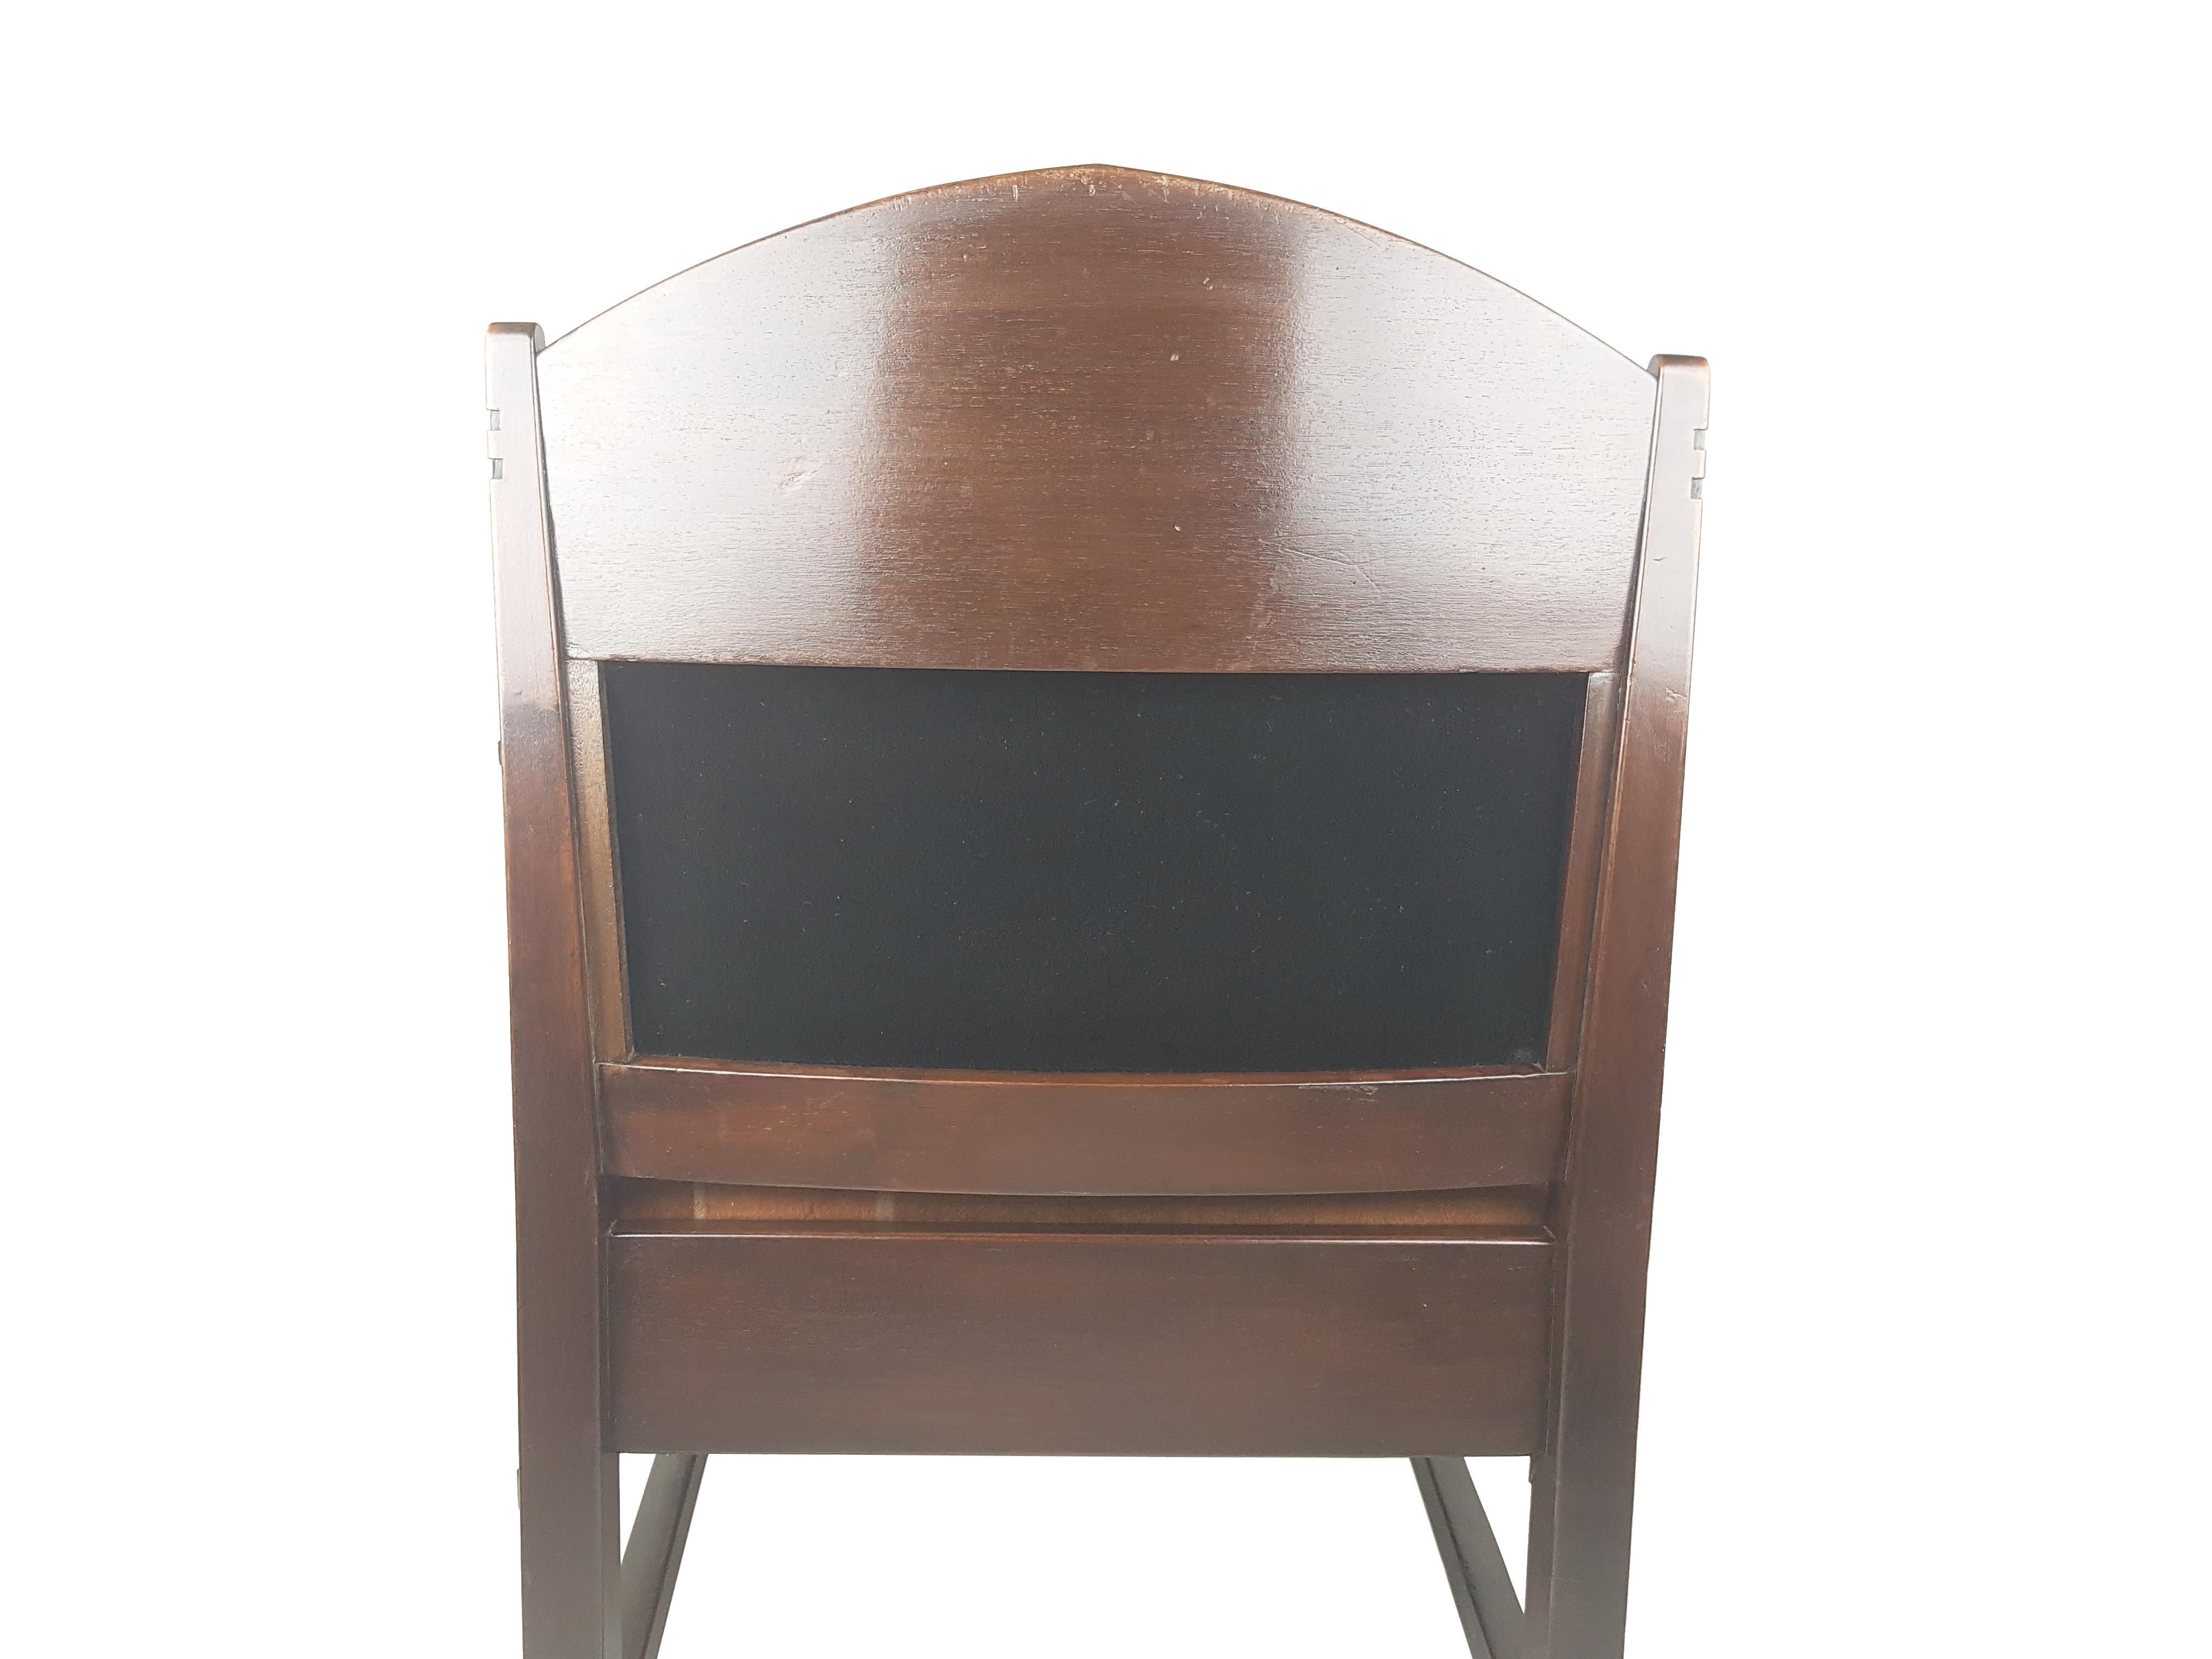 Rare Dutch Velvet & Wood '20s Armchair Attr. to C. Bartels from Amsterdam School For Sale 9